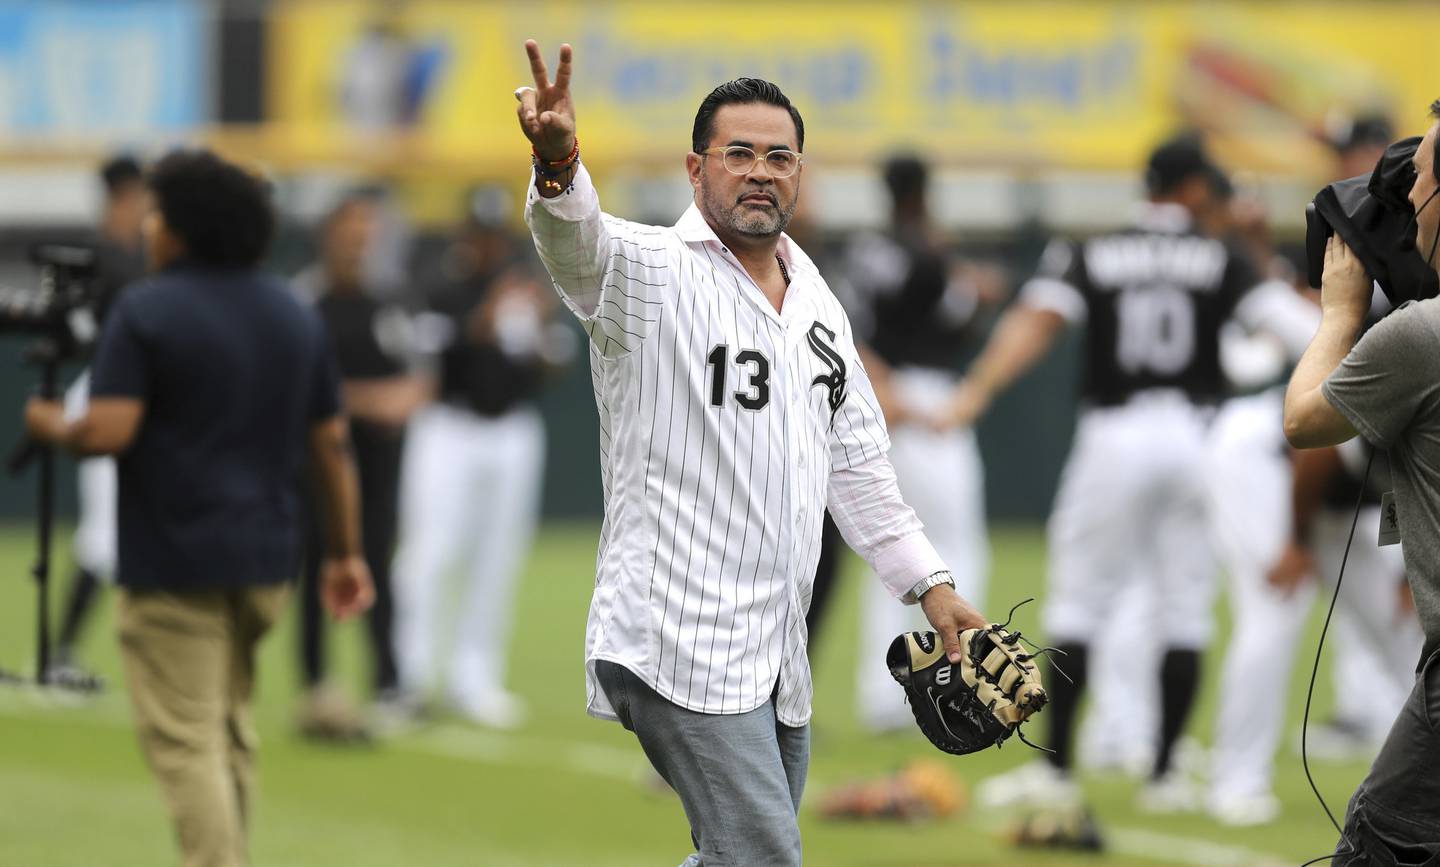 Ozzie Guillén is announced as the 1993 AL West championship team is honored before a White Sox game  at Guaranteed Rate Field on July 14, 2018.